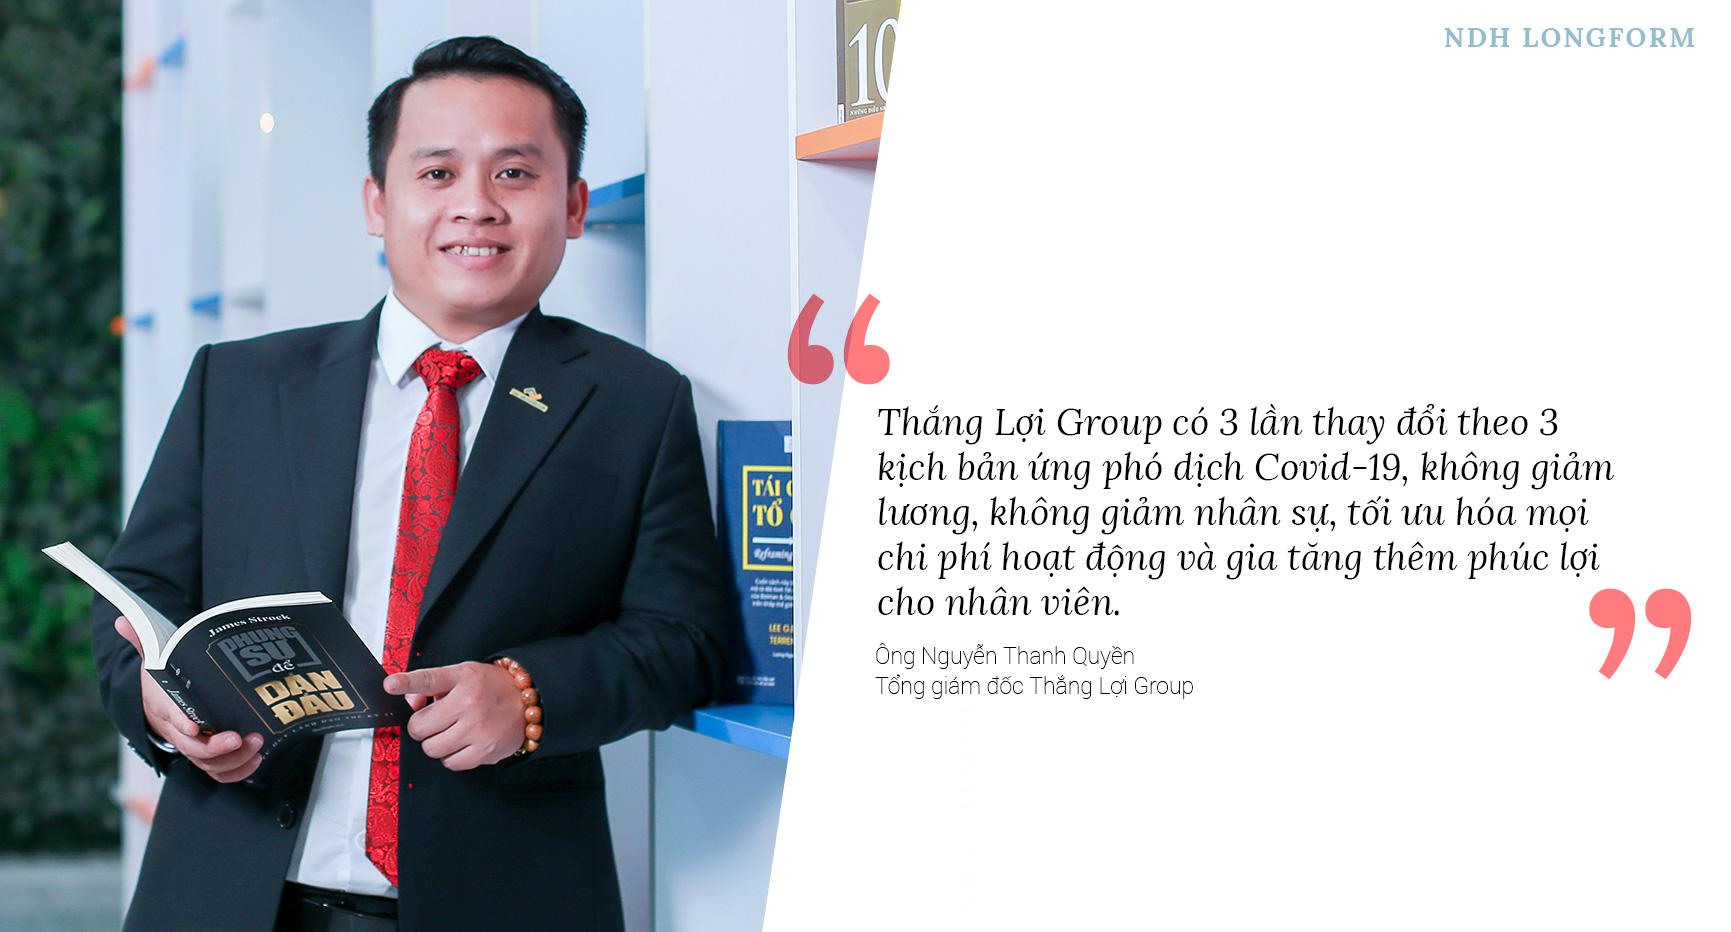 CEO Thang Loi Group: Confront to overcoming Covid-19, plan on listing shares on HoSE in the period of 2021-2022